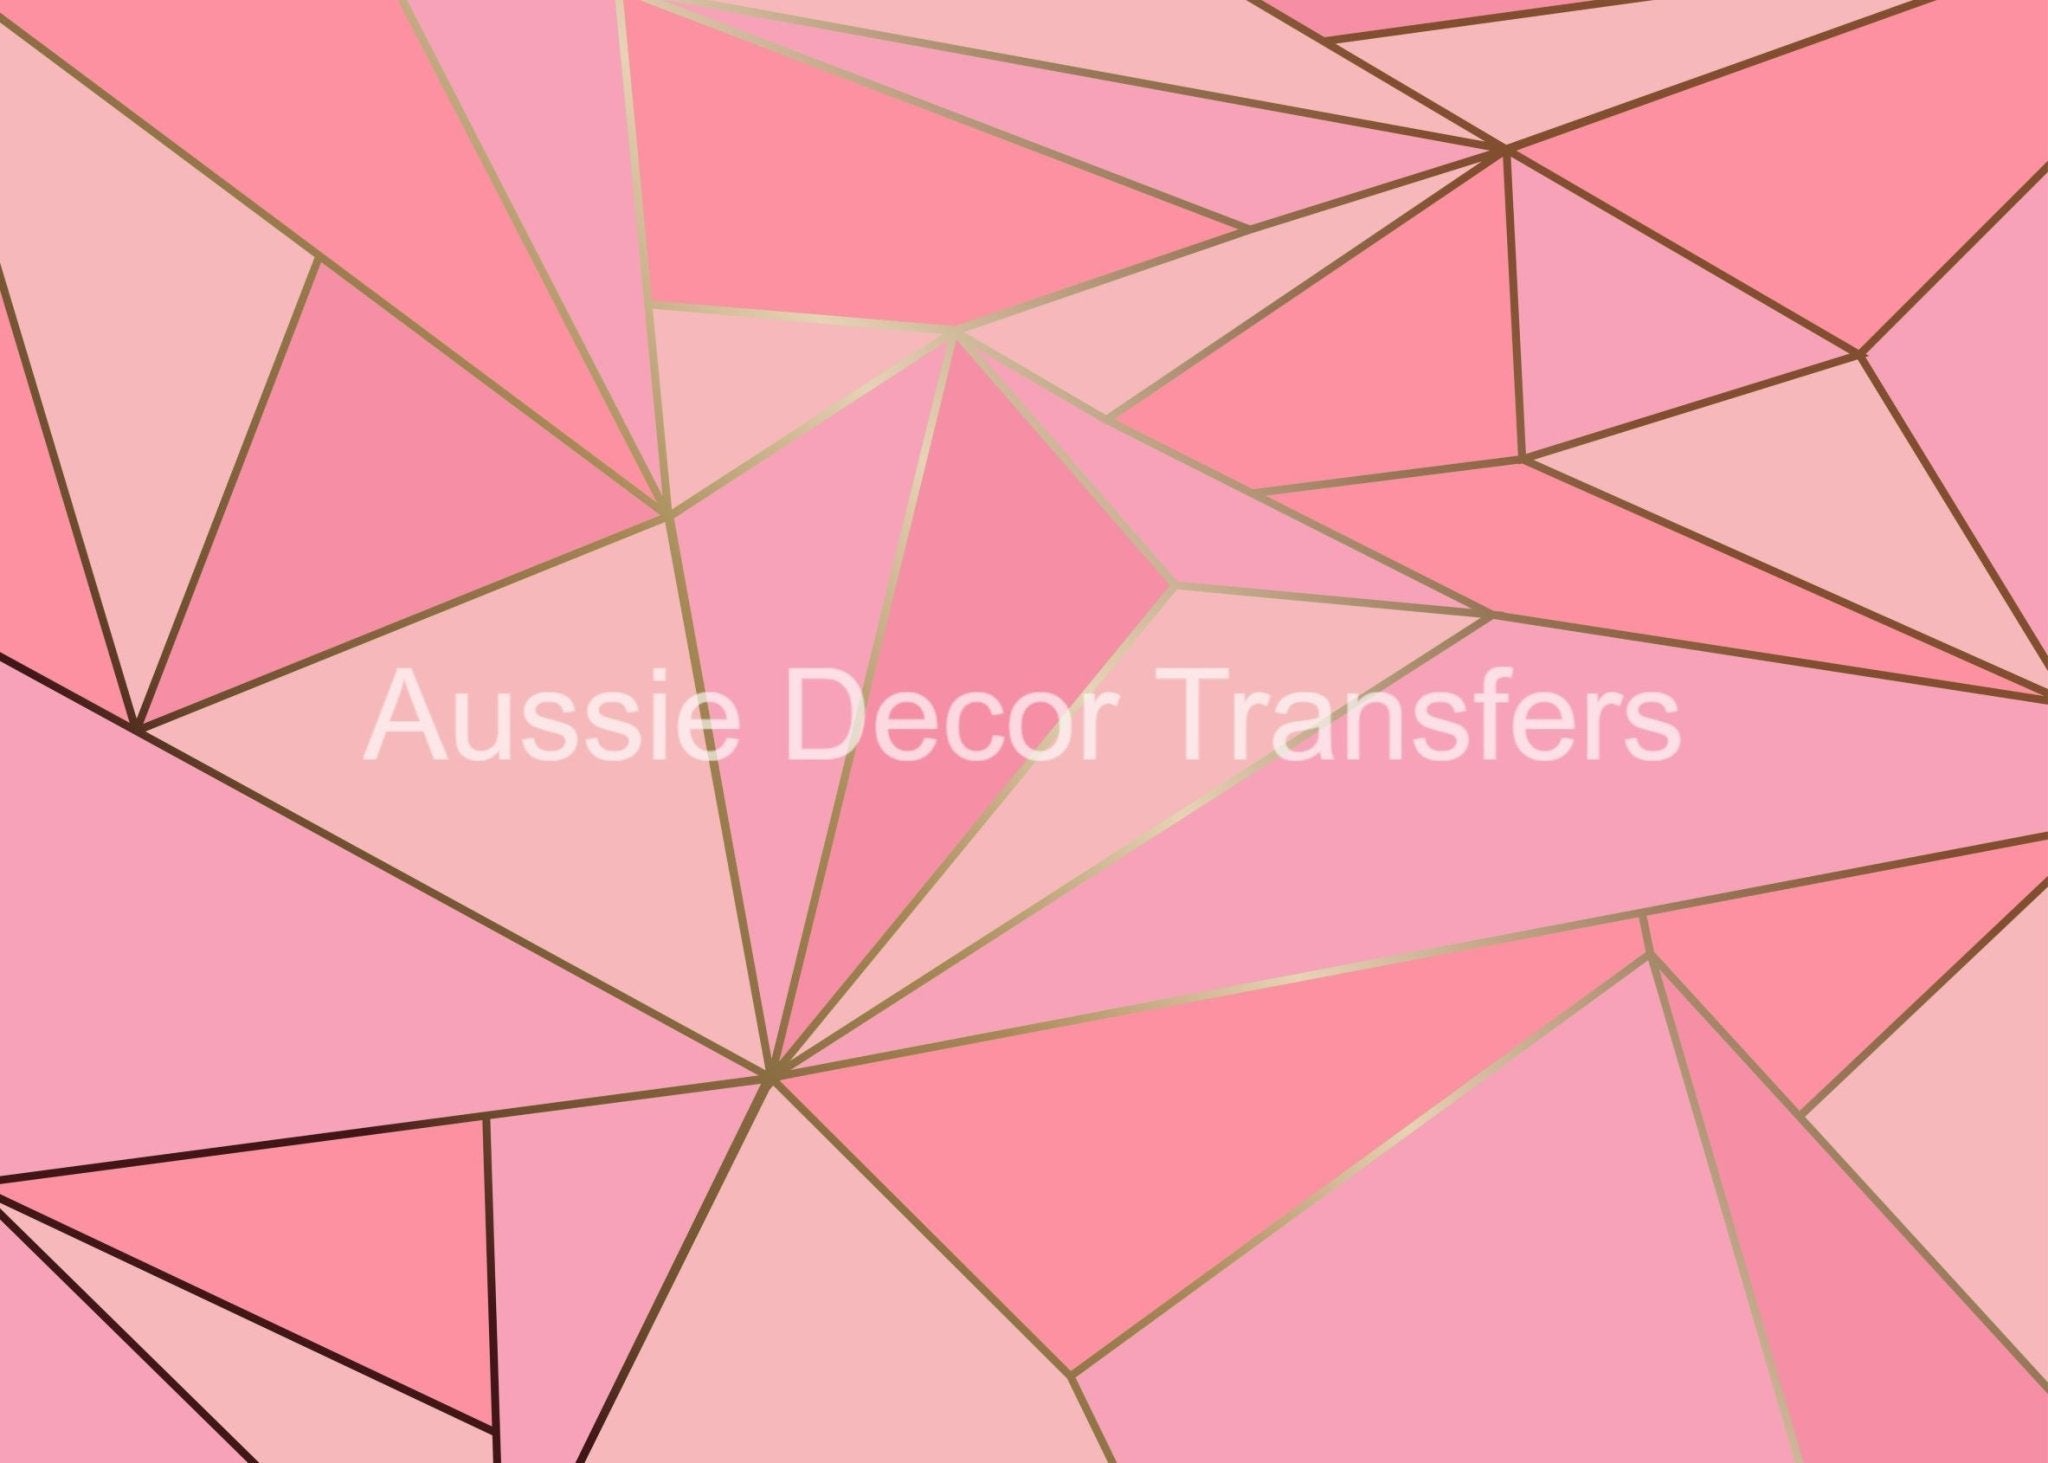 Aussie Decor Transfers Poster Print Coral and Gold Geo - Not Your Average Poster Print! - AUS ONLY